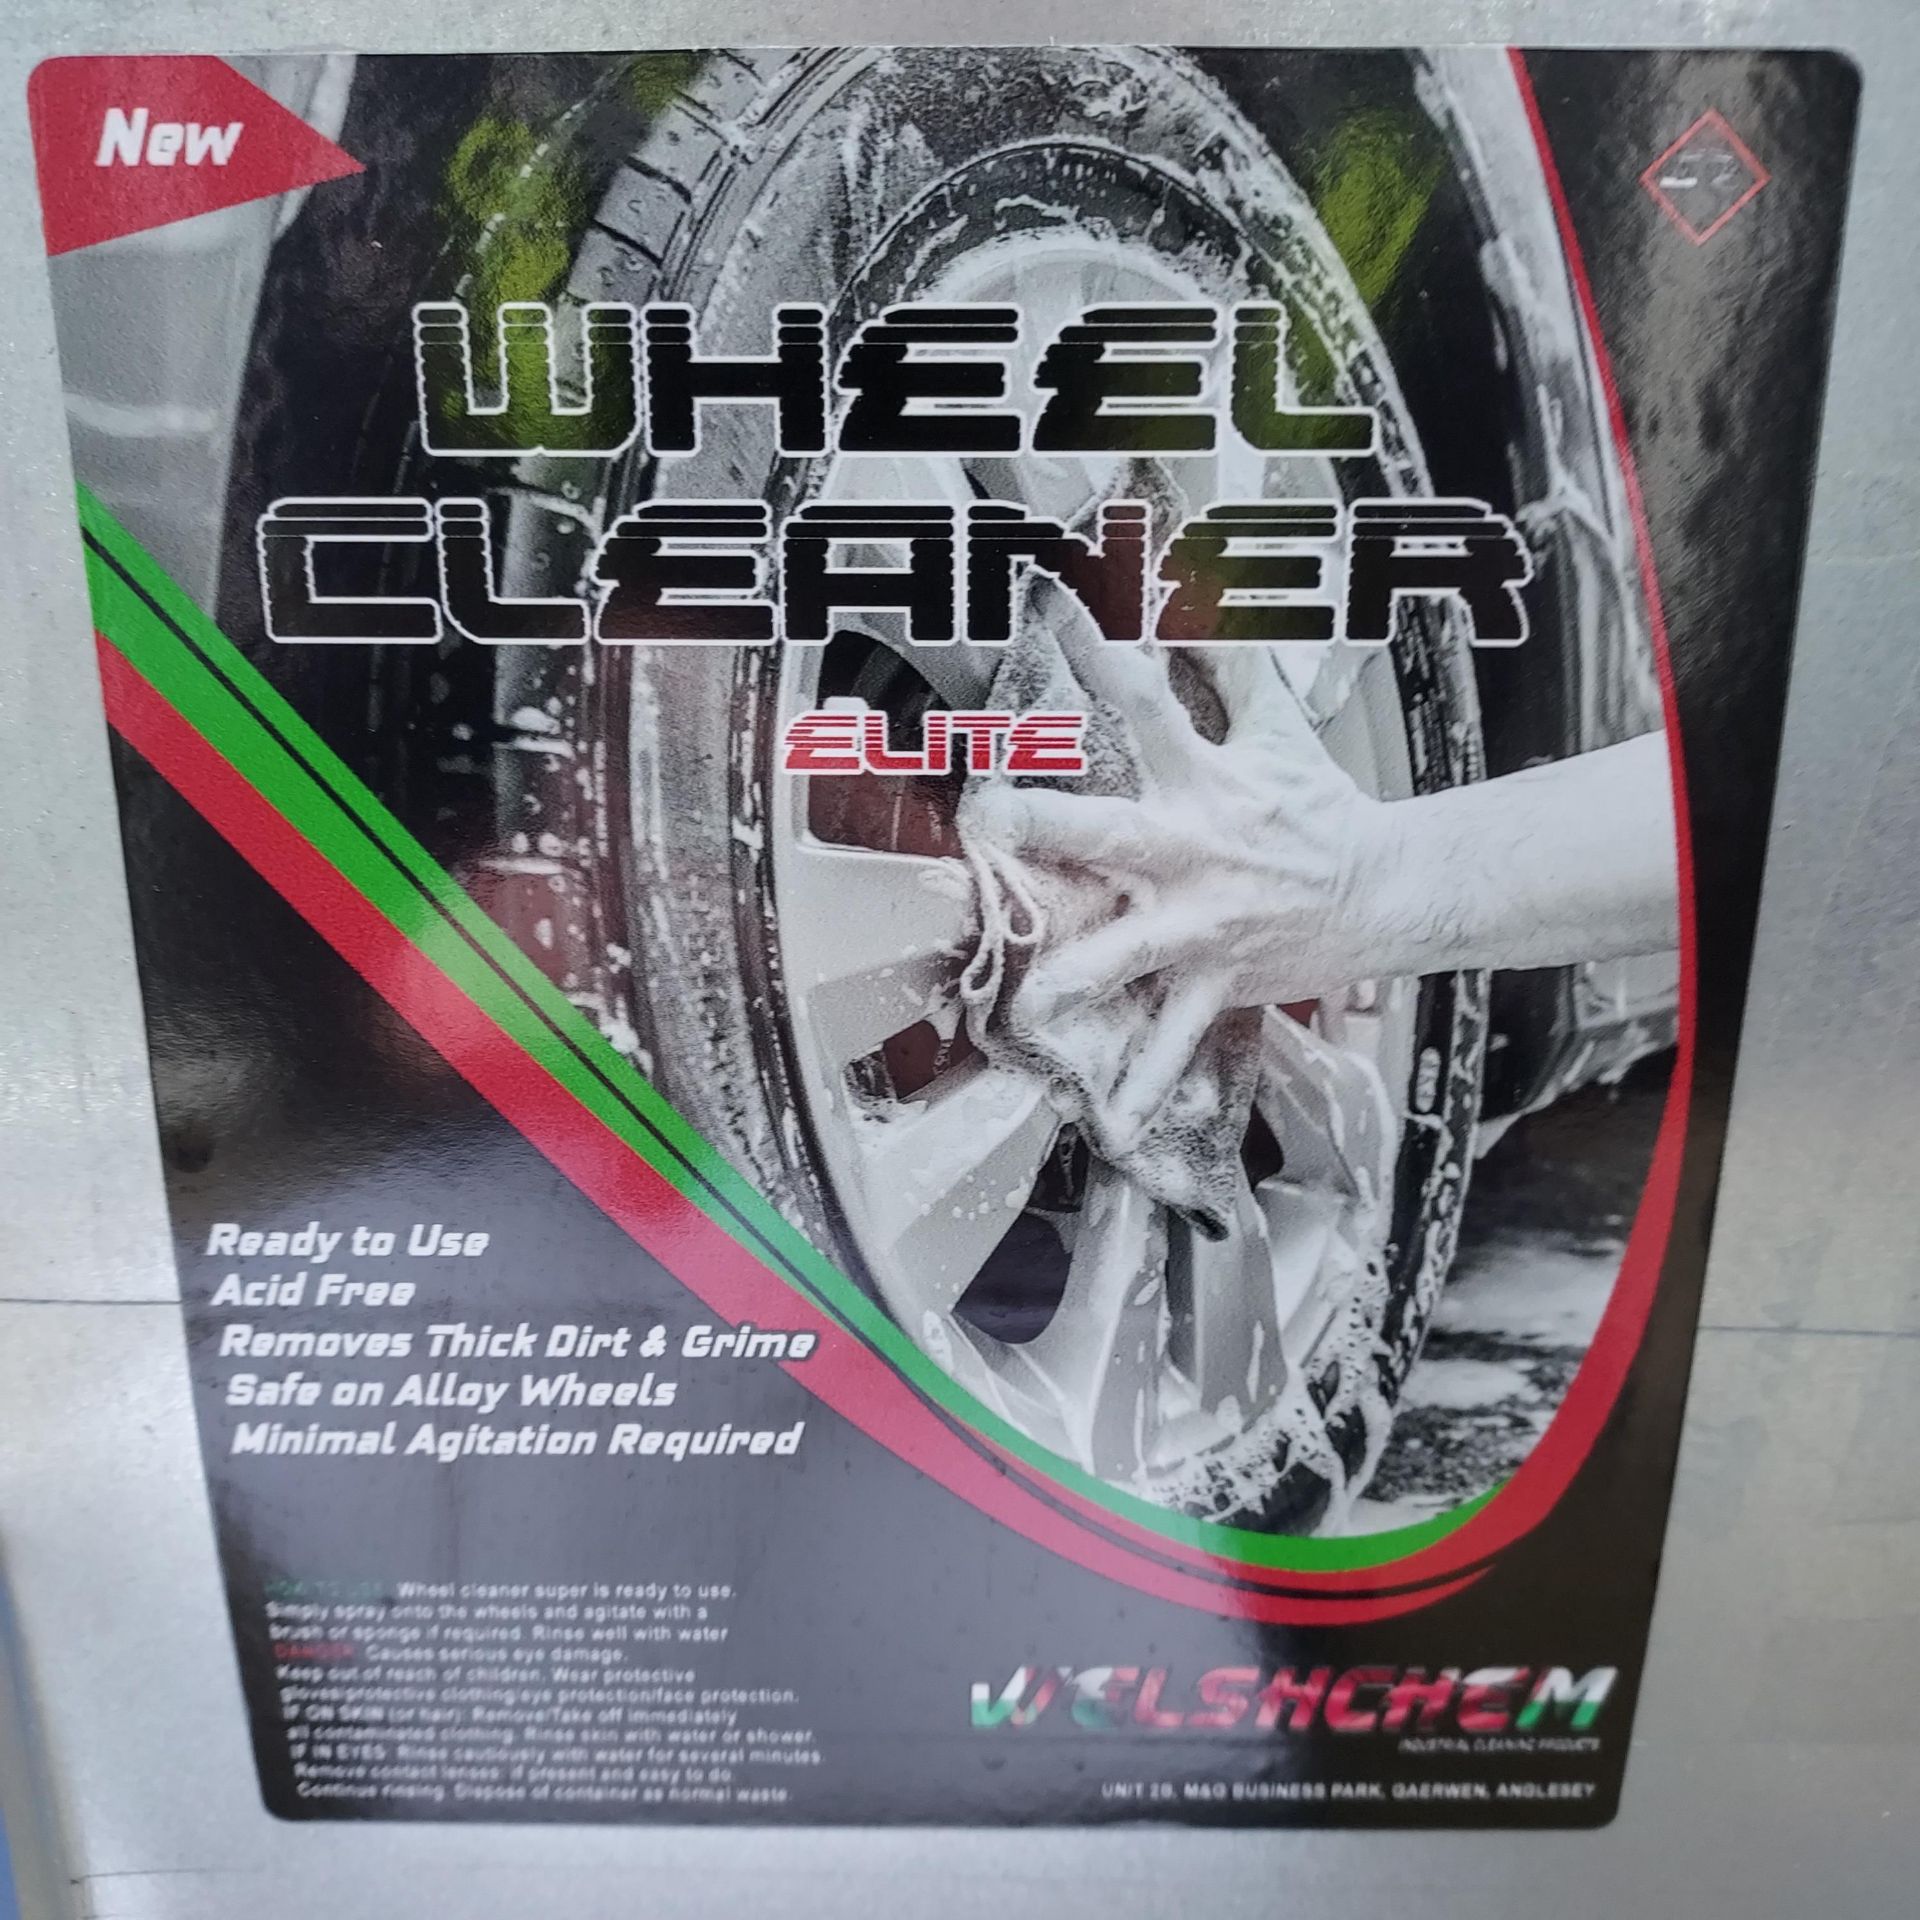 1000L IBC CONTAINING - WELSCHEM ELITE WHEEL CLEANER READY TO USE, ACID FREE, REMOVES THICK DIRT & - Image 2 of 2